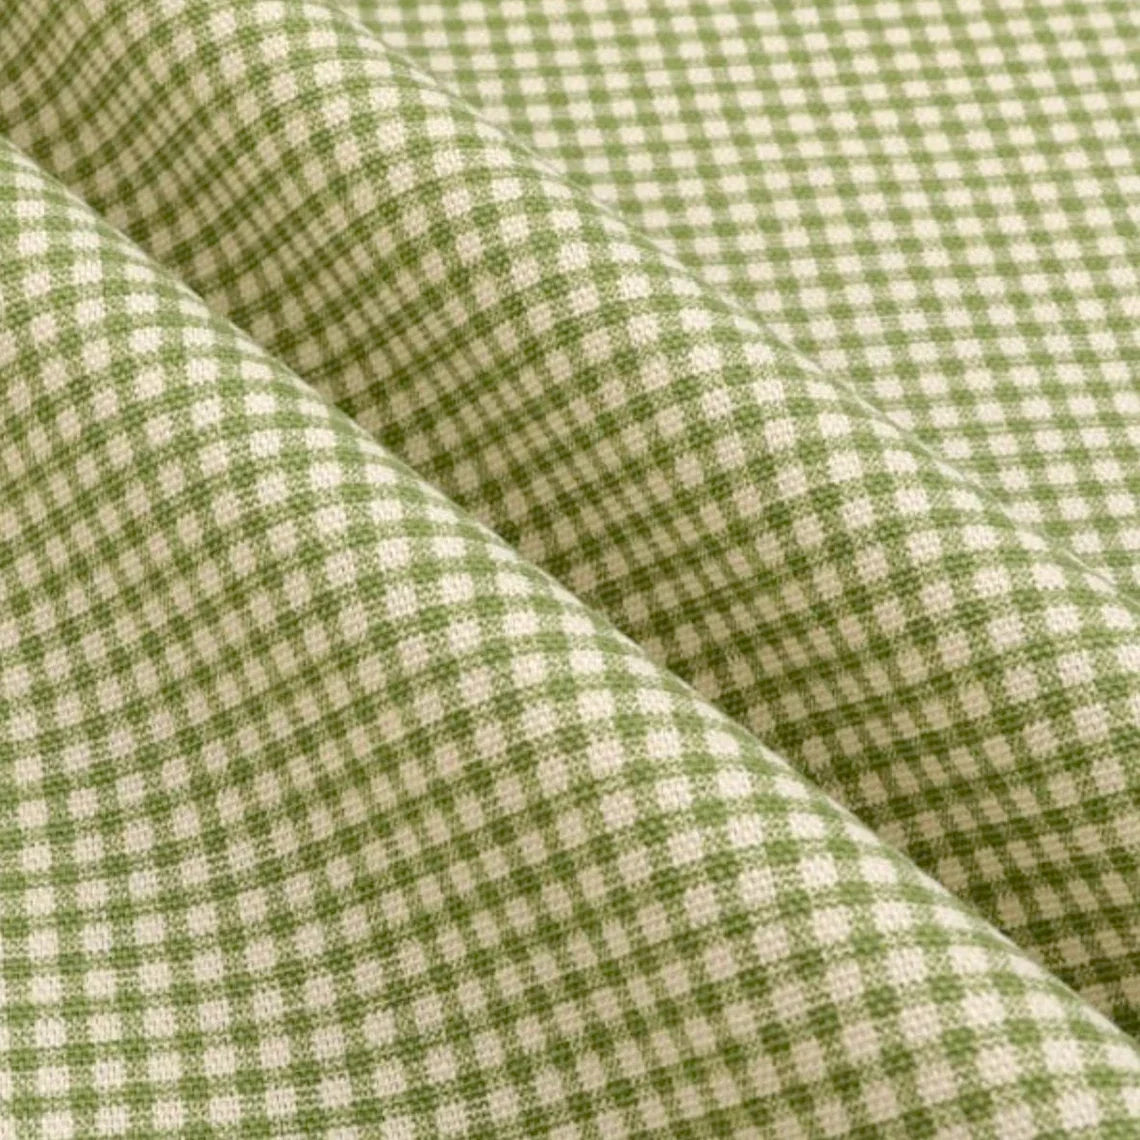 round tablecloth in farmhouse jungle green gingham check